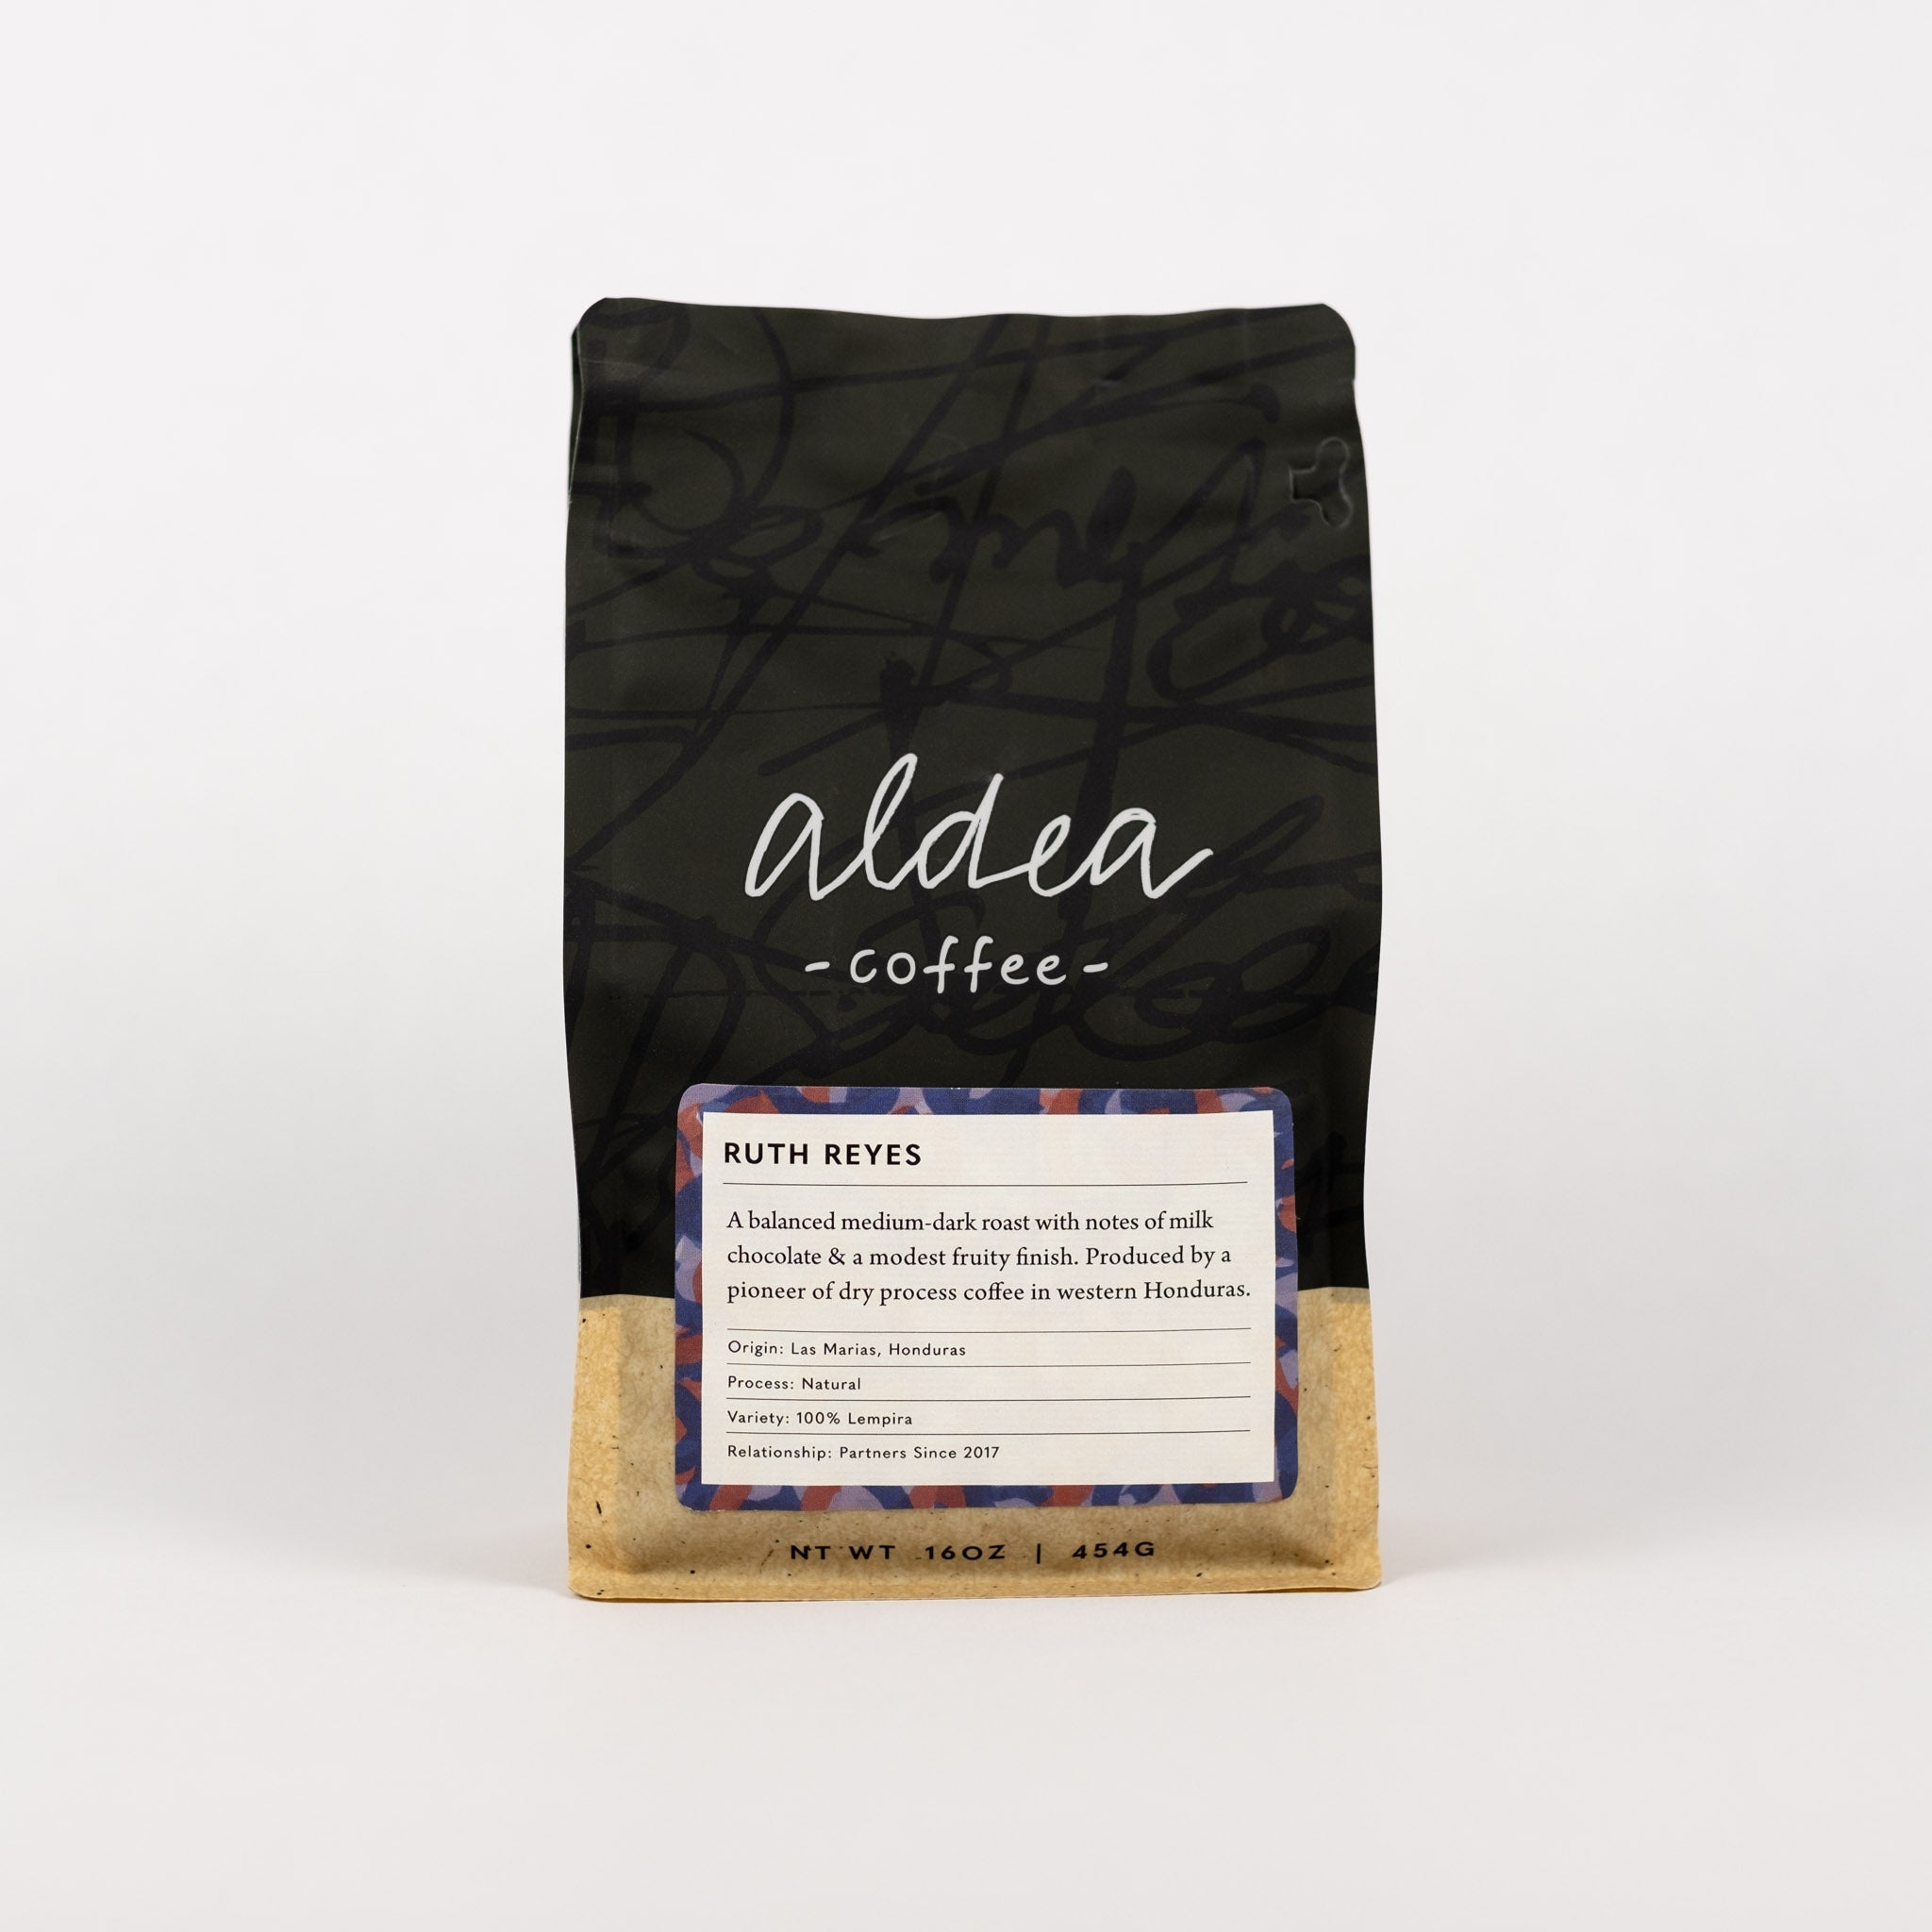 Ruth Reyes - Naturally Processed - Aldea Coffee